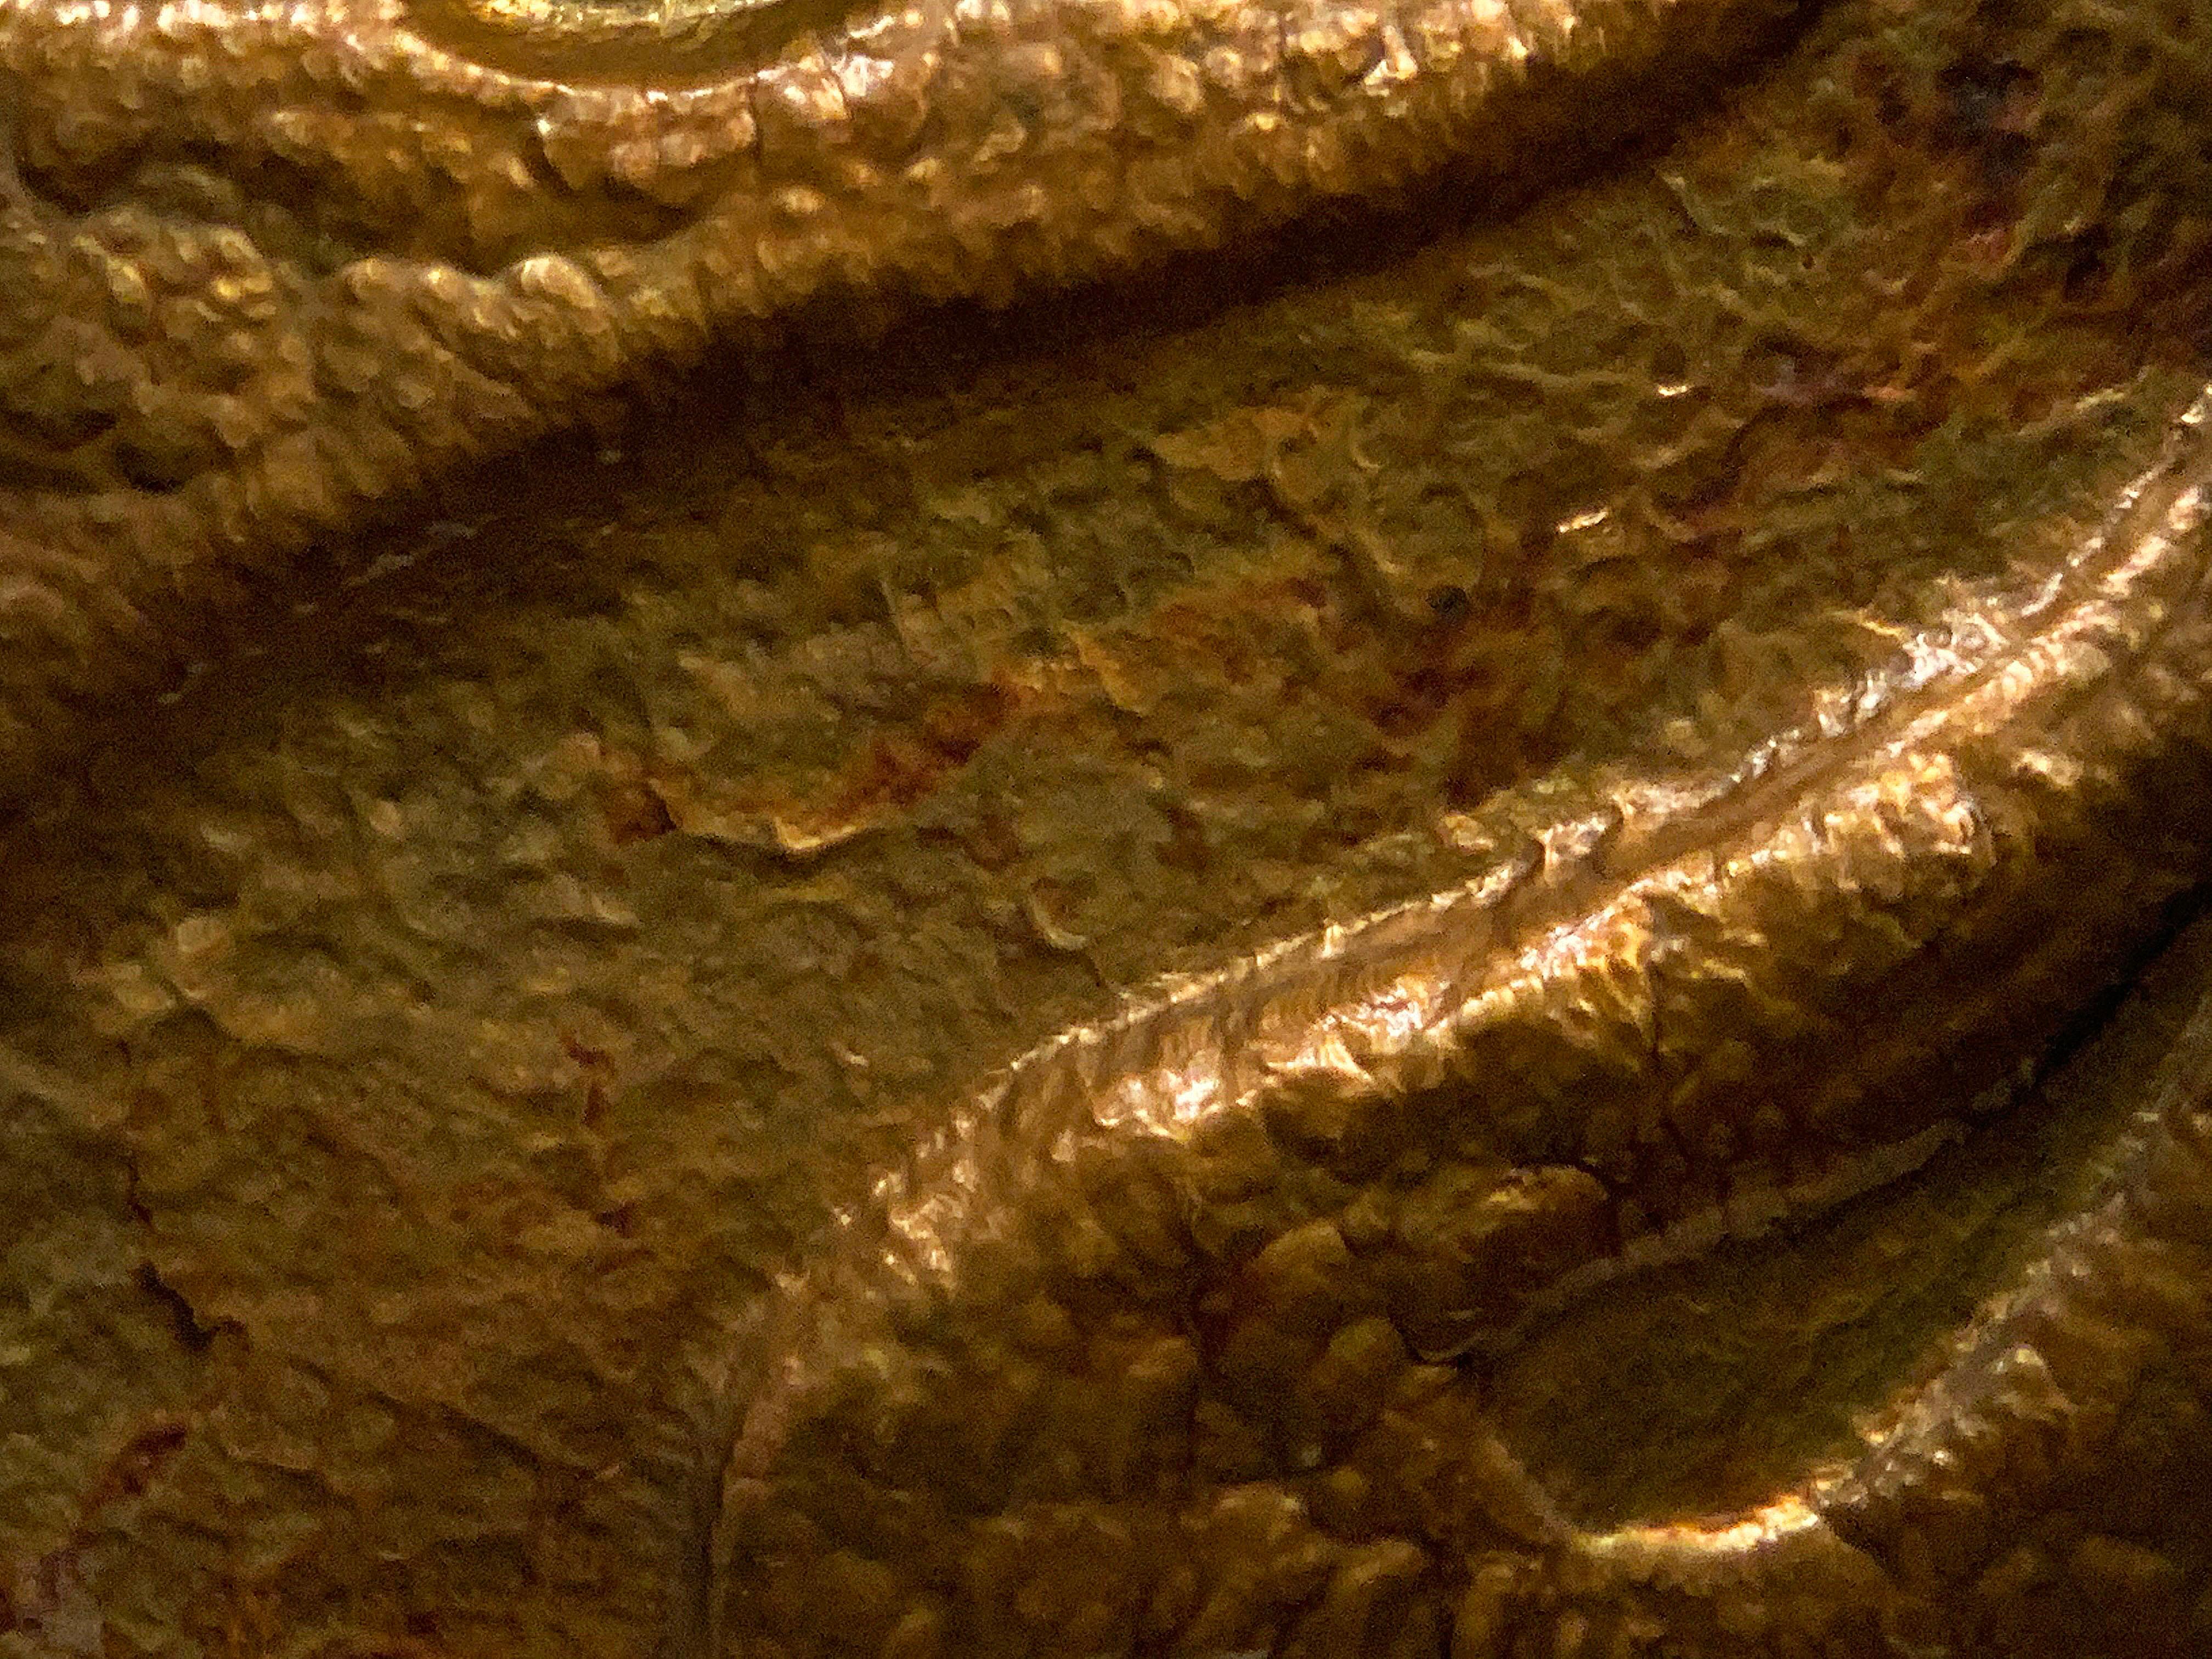 Hammered copper wall relief by W.R.E., 1969. This undulating artwork has a nice hammered texture and patina. Framed in rustic wood frame. Signed and dated on reverse.